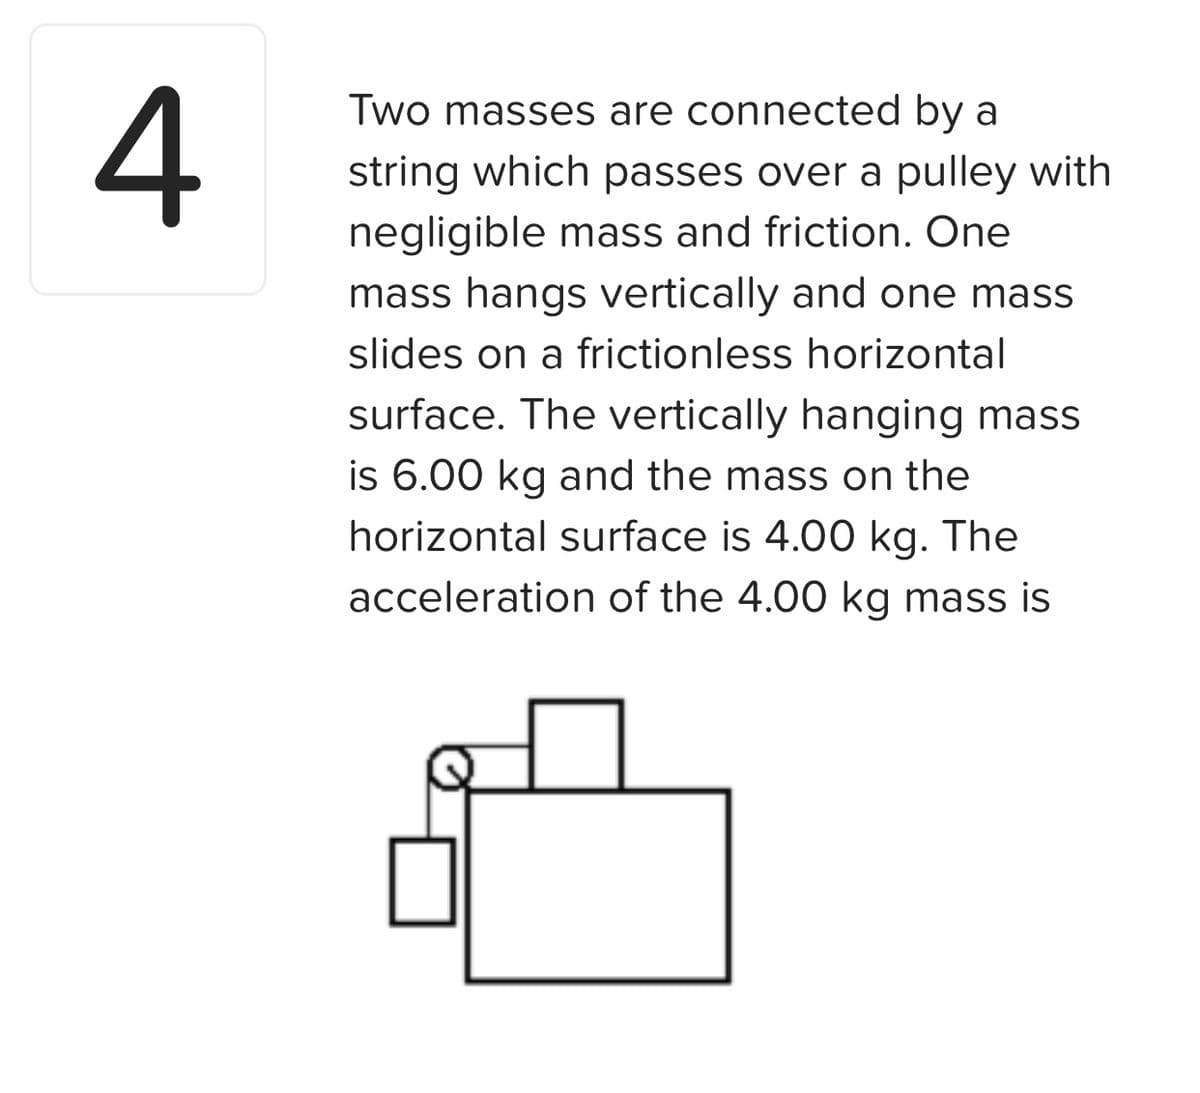 4
Two masses are connected by a
string which passes over a pulley with
negligible mass and friction. One
mass hangs vertically and one mass
slides on a frictionless horizontal
surface. The vertically hanging mass
is 6.00 kg and the mass on the
horizontal surface is 4.00 kg. The
acceleration of the 4.00 kg mass is
